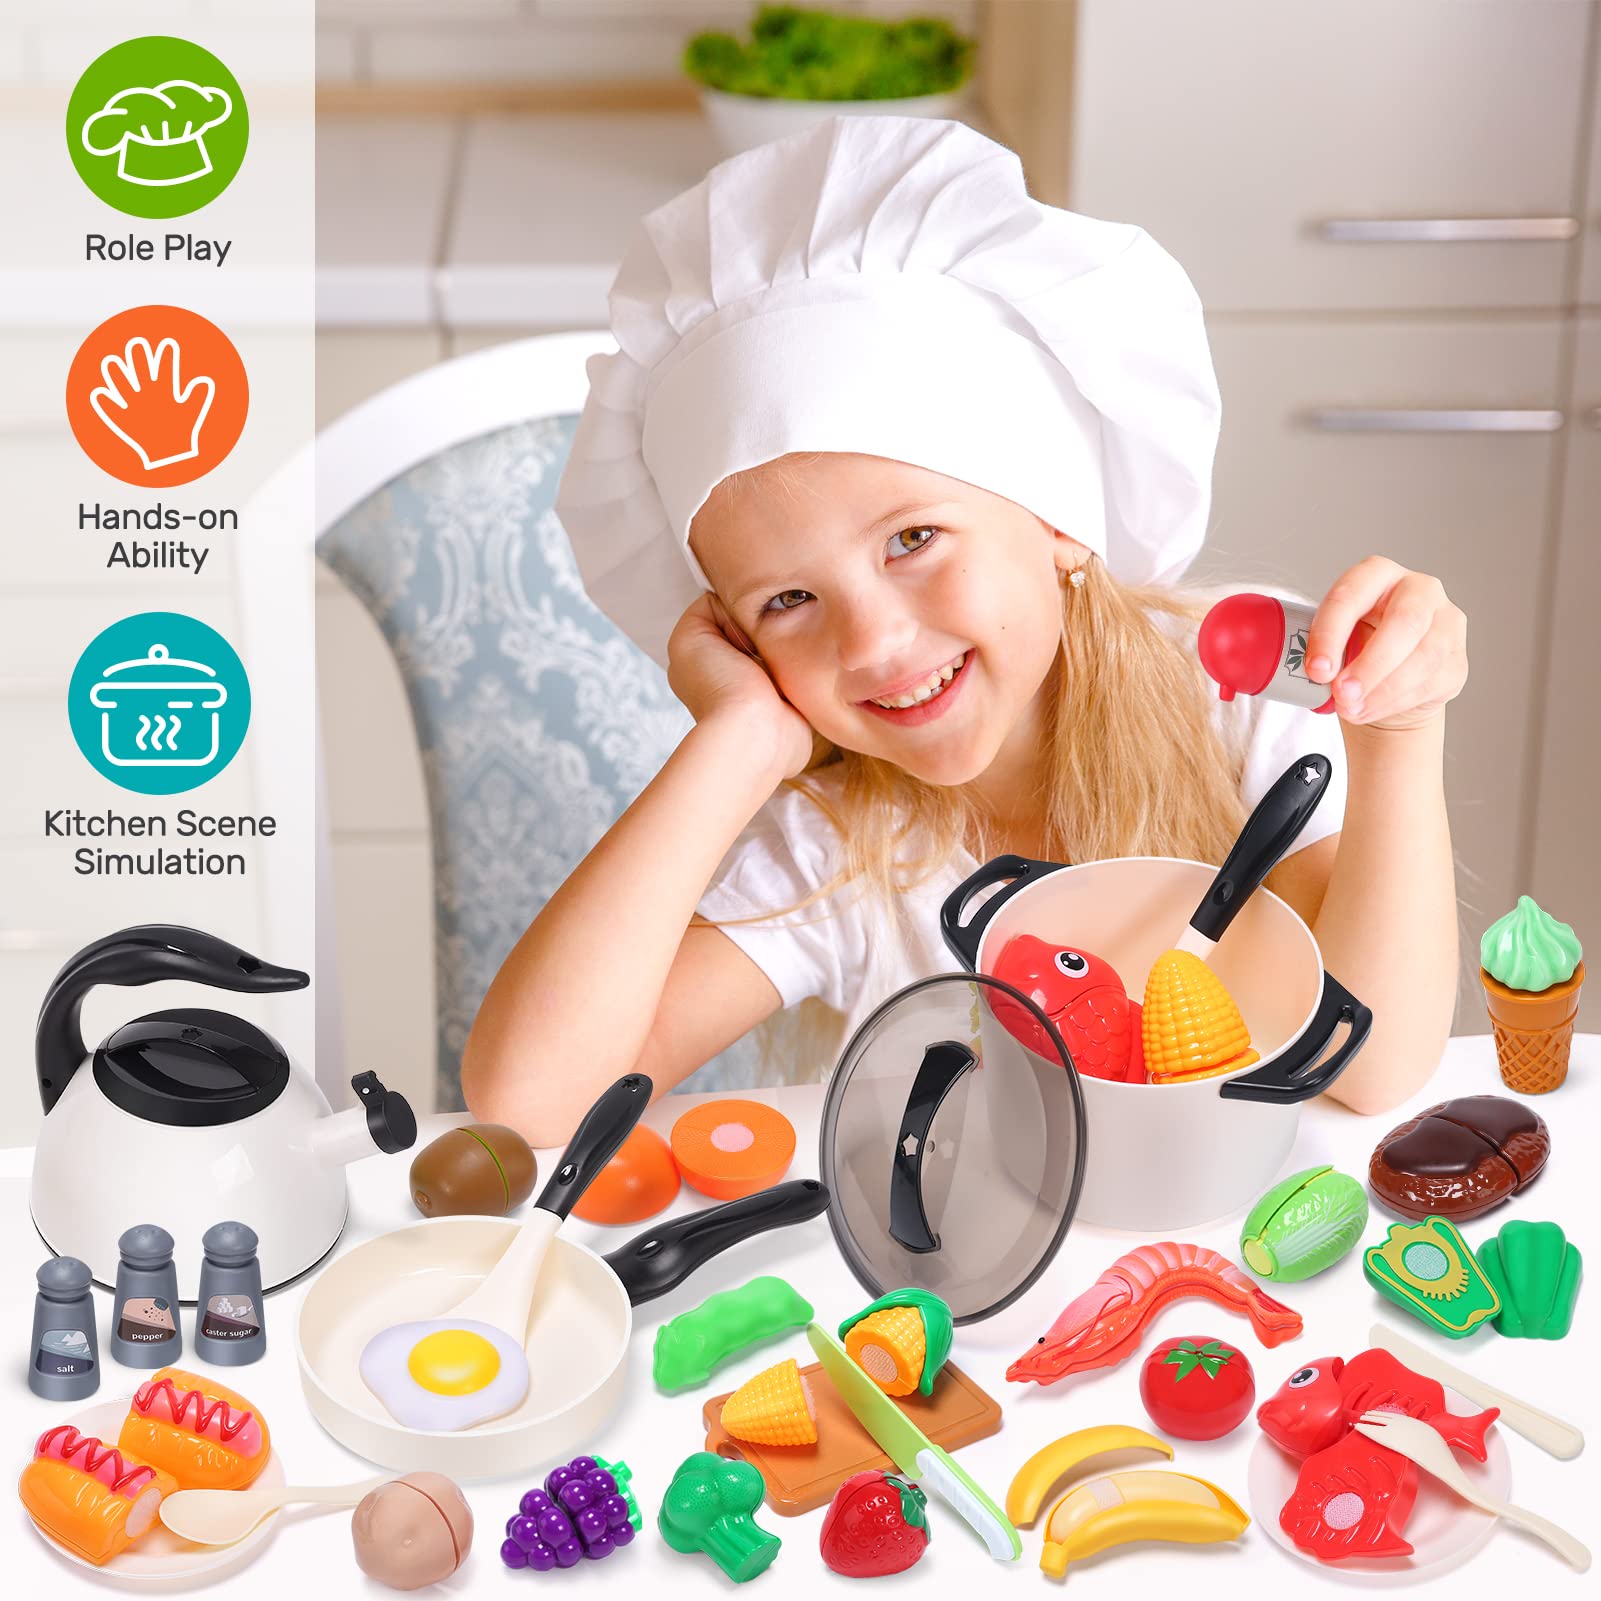 Cute Stone Kids' Kitchen Accessories Set, Cooking Playsets With Pots, Pans,  Utensils And Food, Kitchen Playset Toys For Girls And Boys (accessories  Color Random)